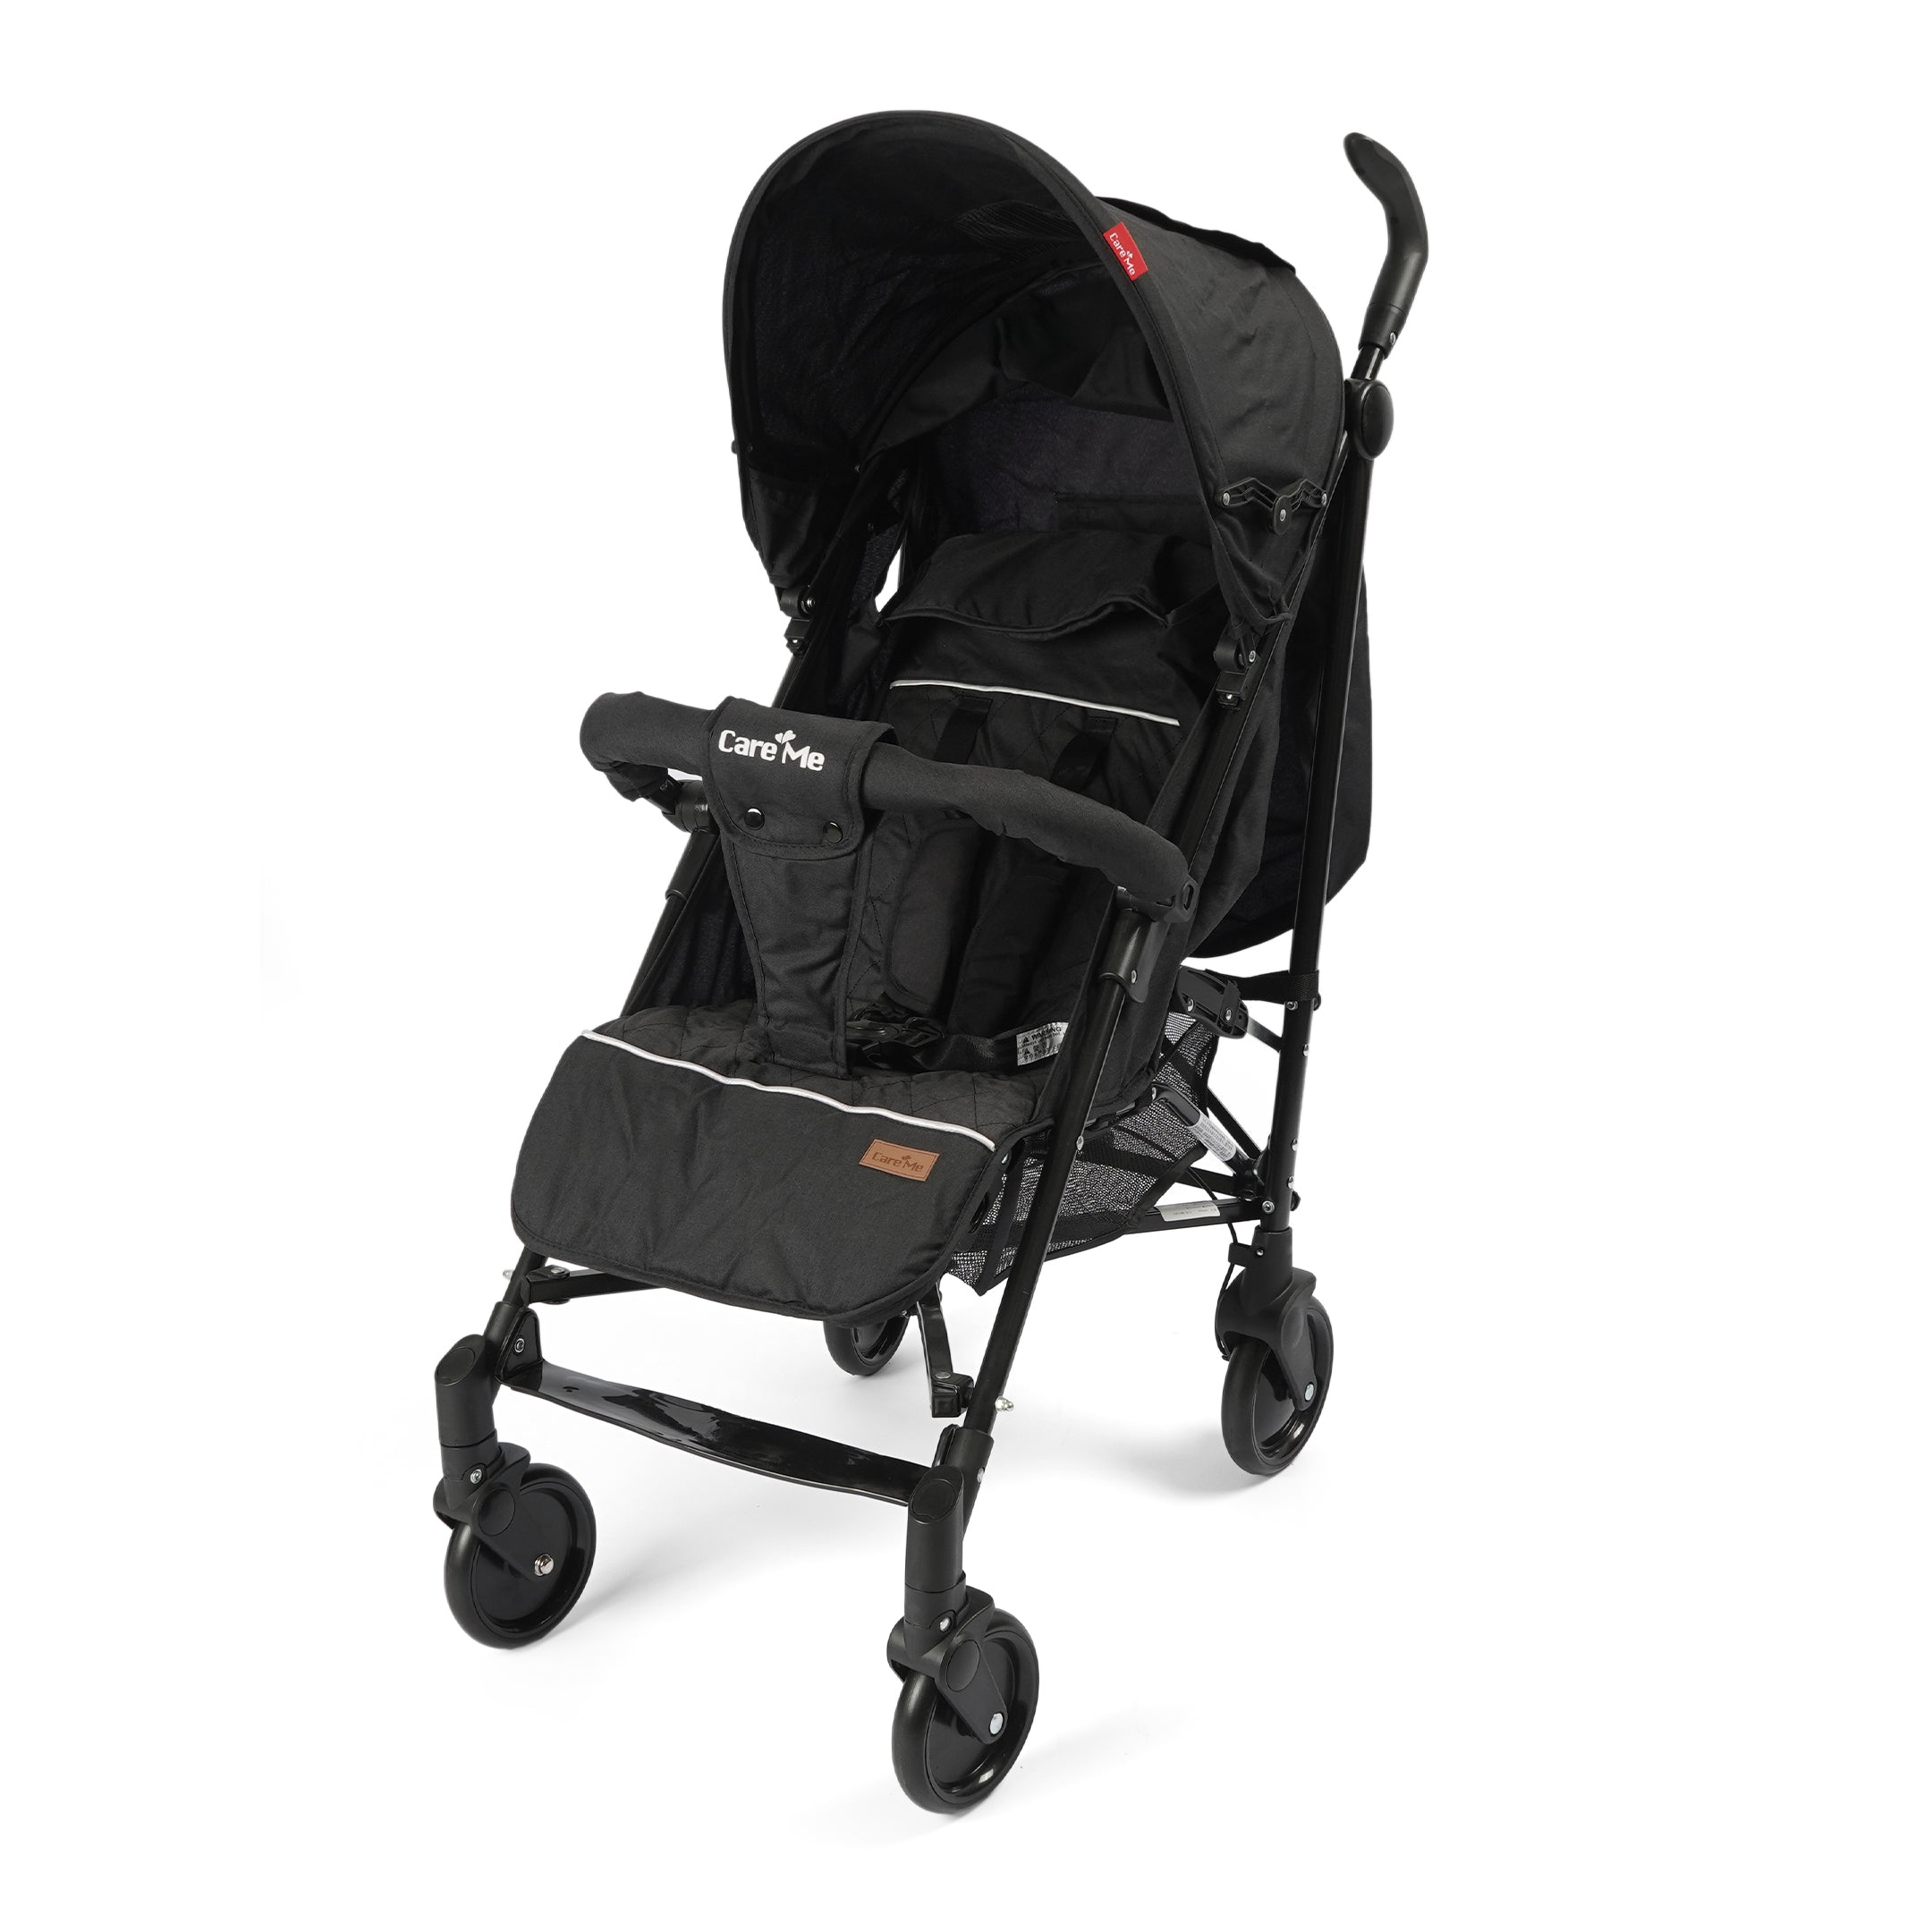 Unisex Baby Buggy Stroller - Care Me